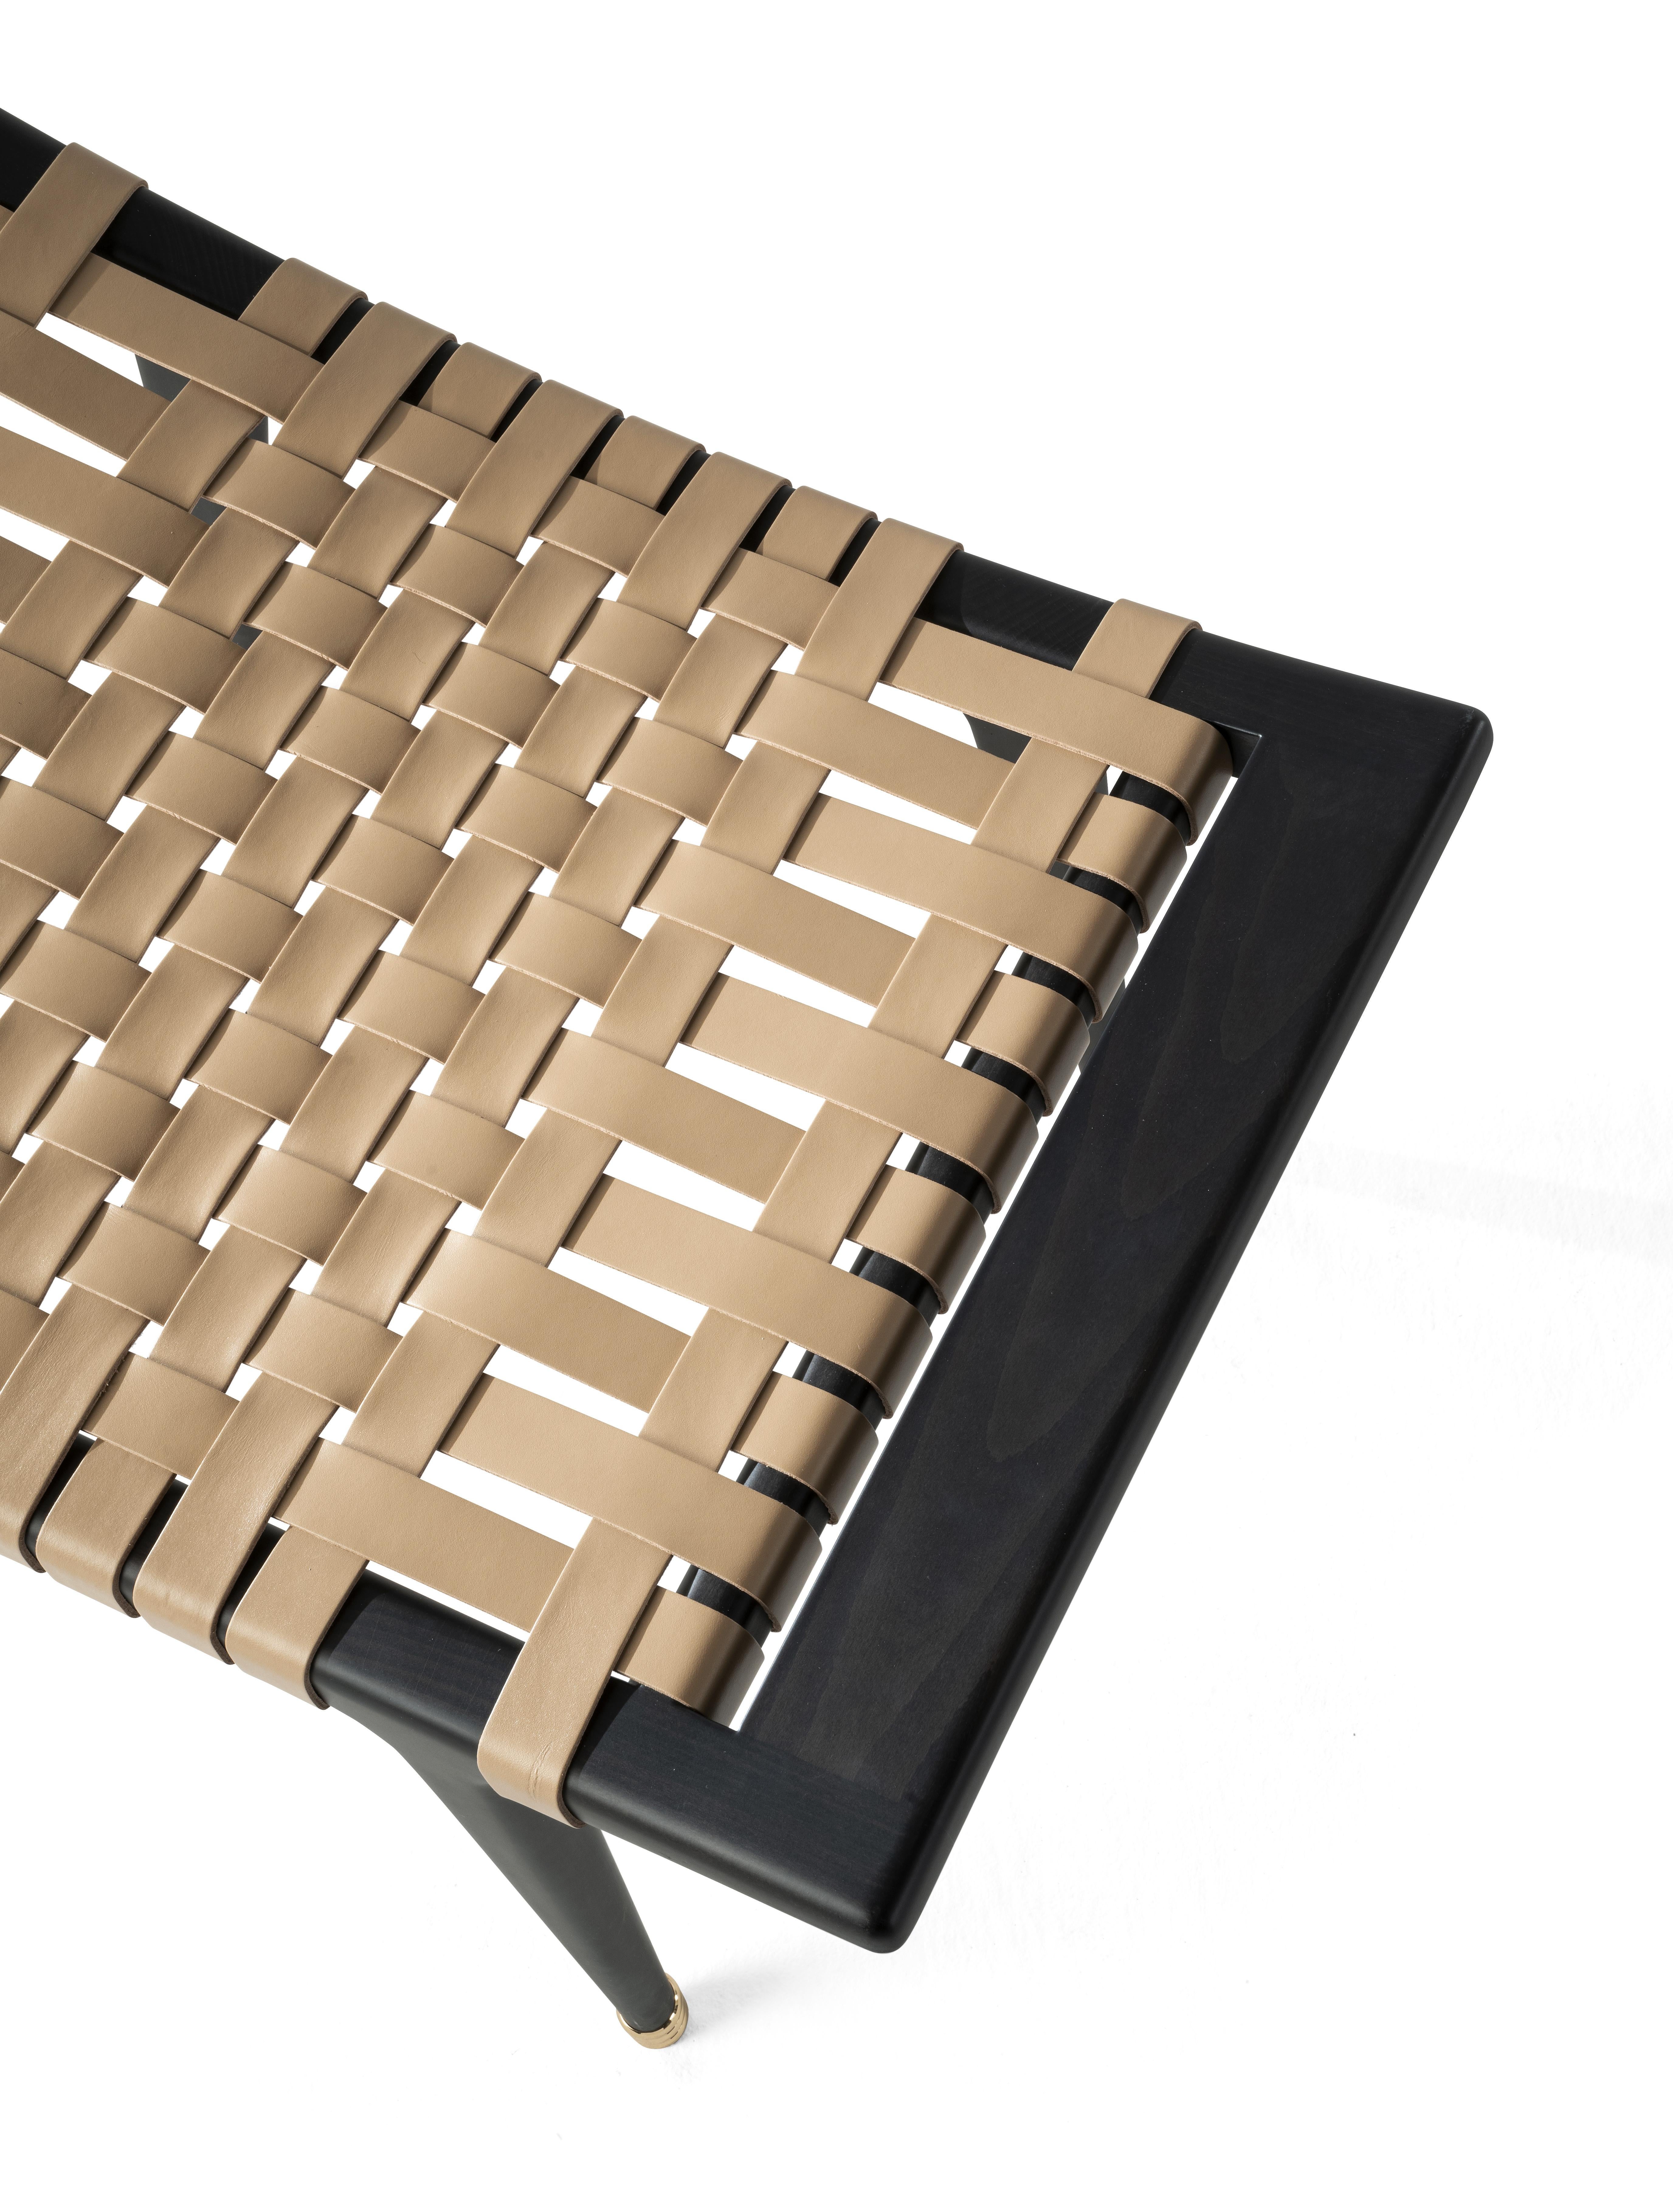 Modern 21st Century Dinka Stool in Wood and Leather col. Camel by Etro Home Interiors